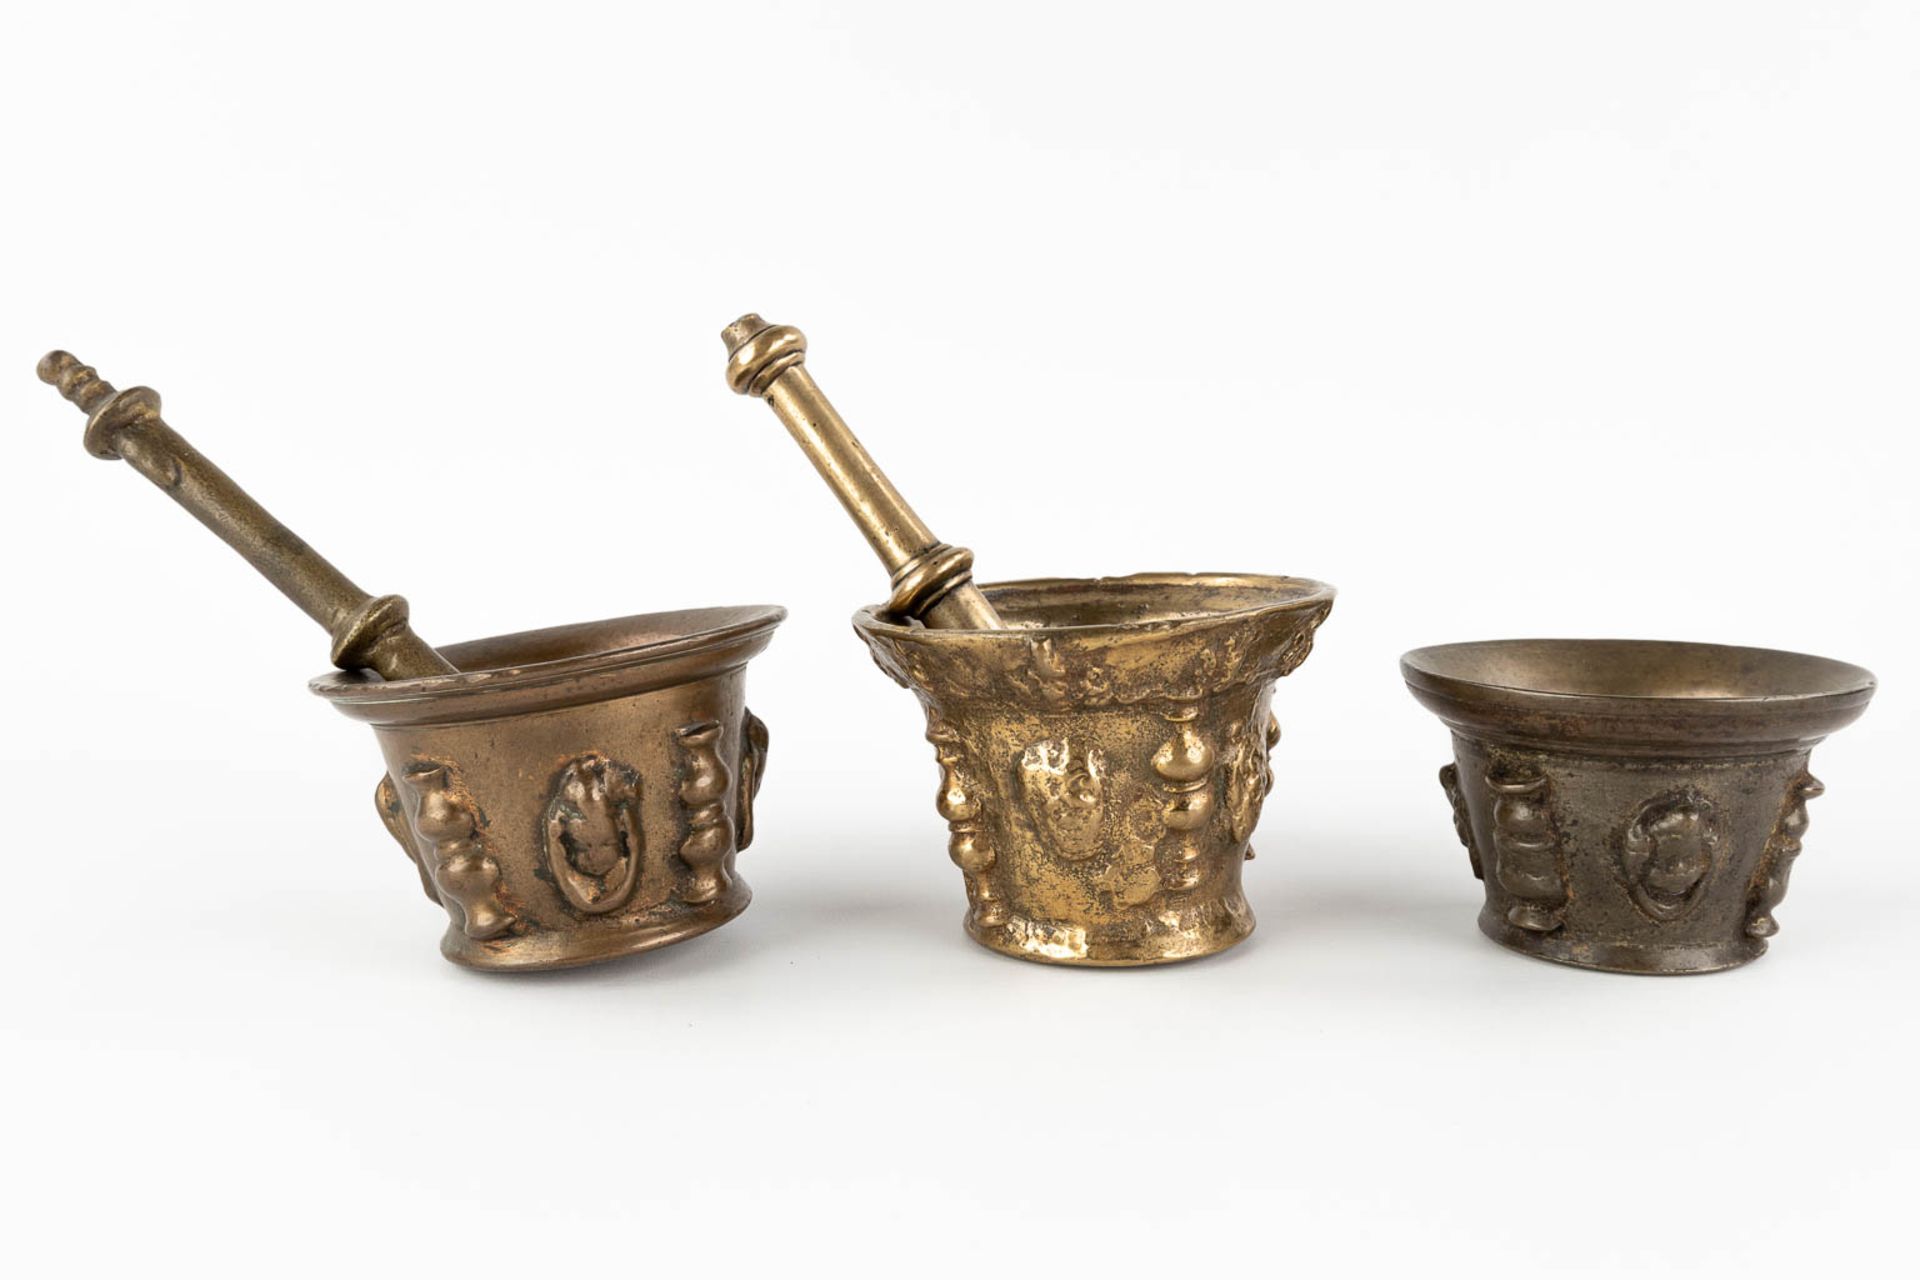 Three antique mortars with two pestles, bronze. Probably Spain, 17th/18th C. (H:9 x D:13 cm) - Image 3 of 12